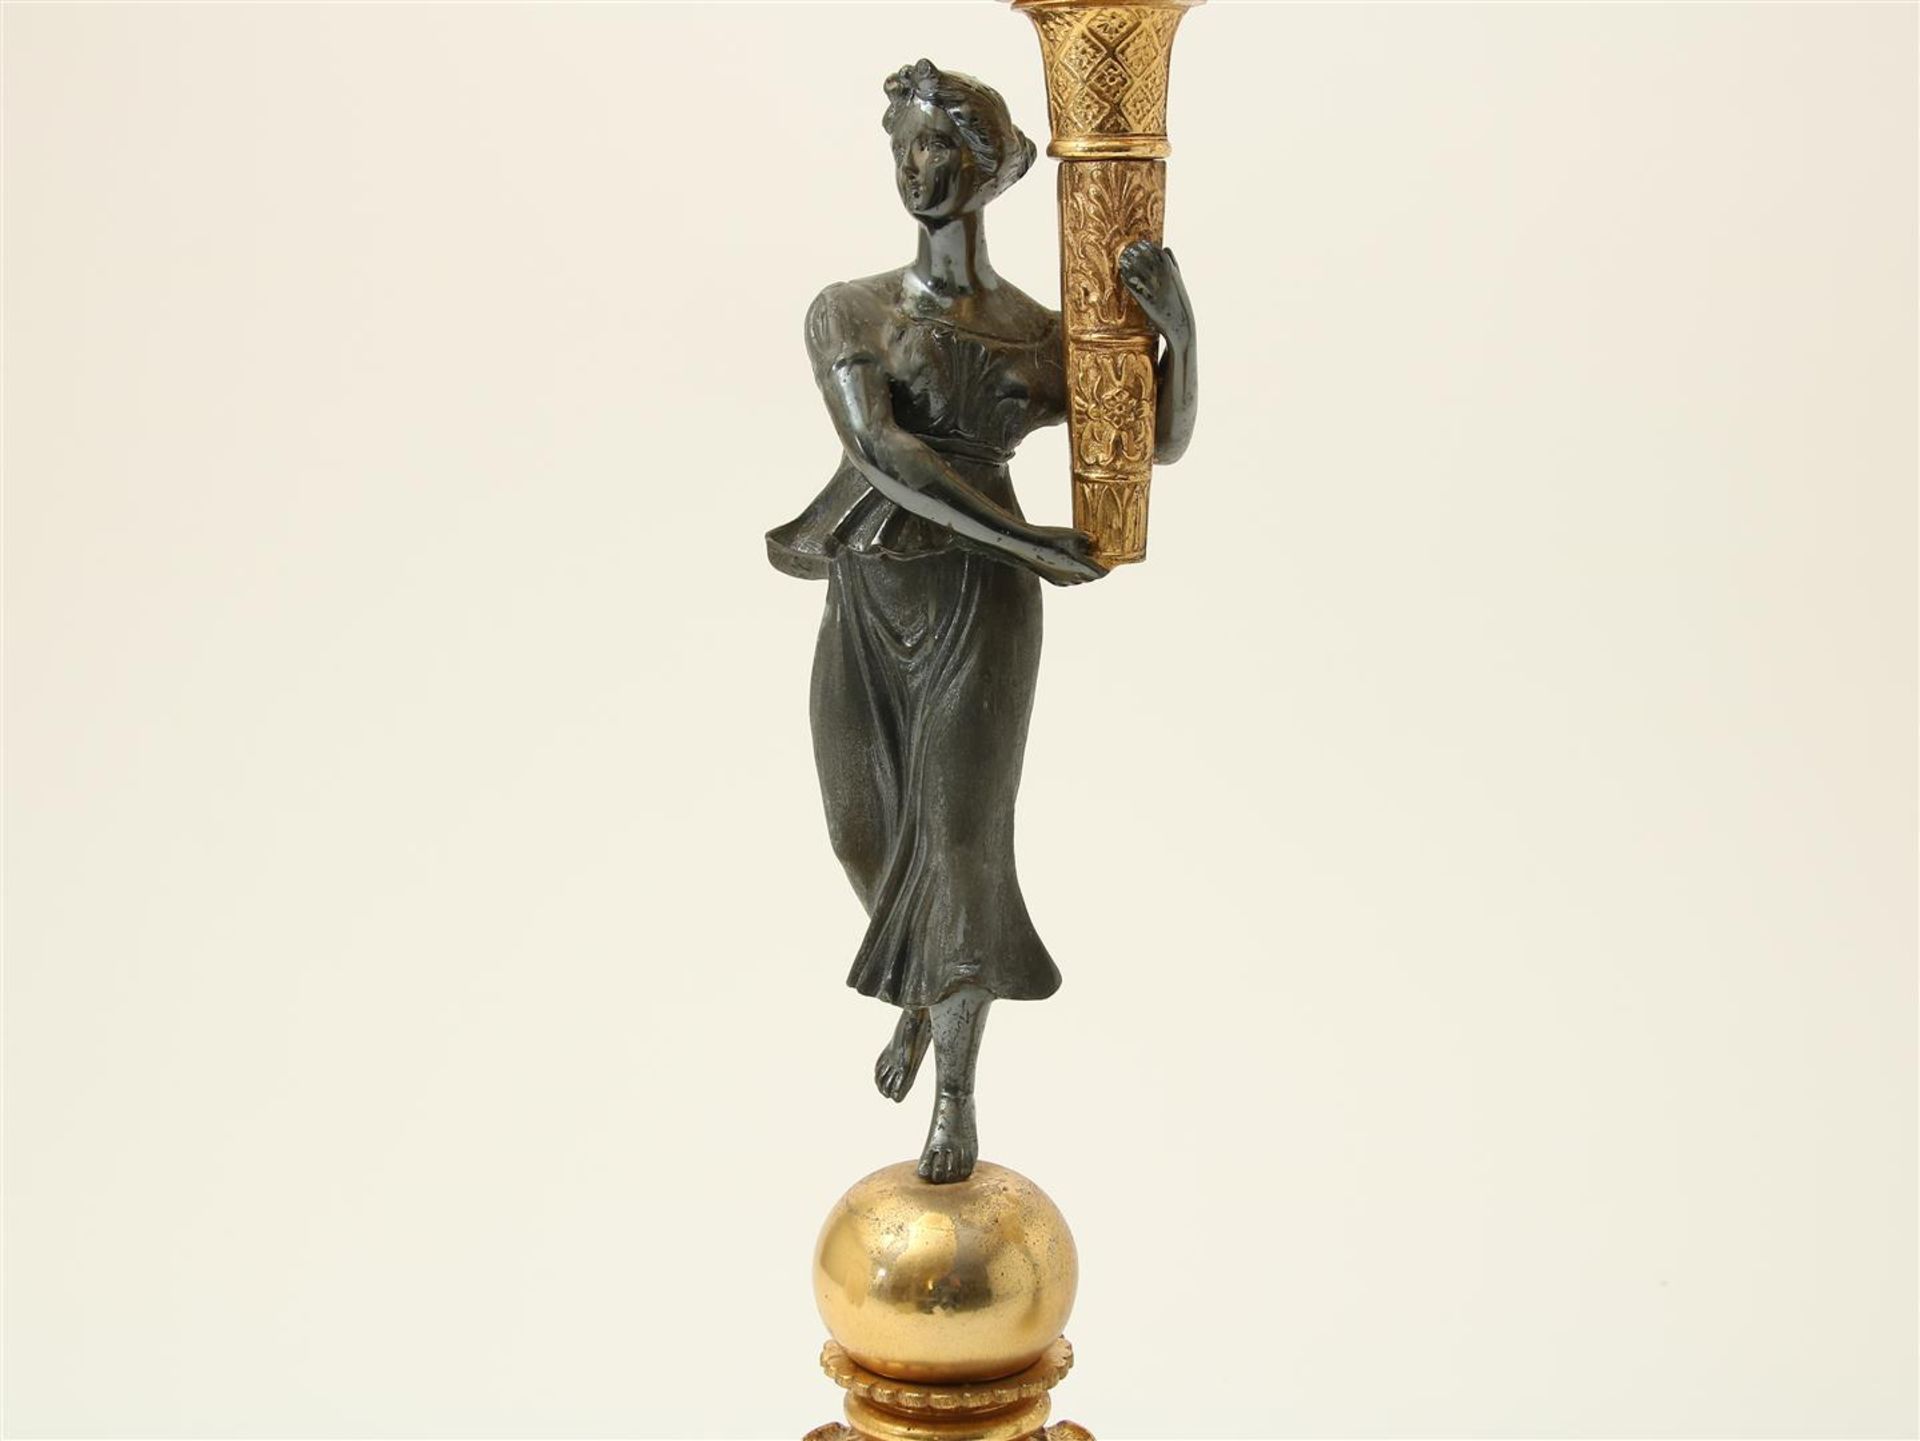 Set of bronze Empire style 5 light candlesticks carried by man and woman, France 20th century, - Image 3 of 6